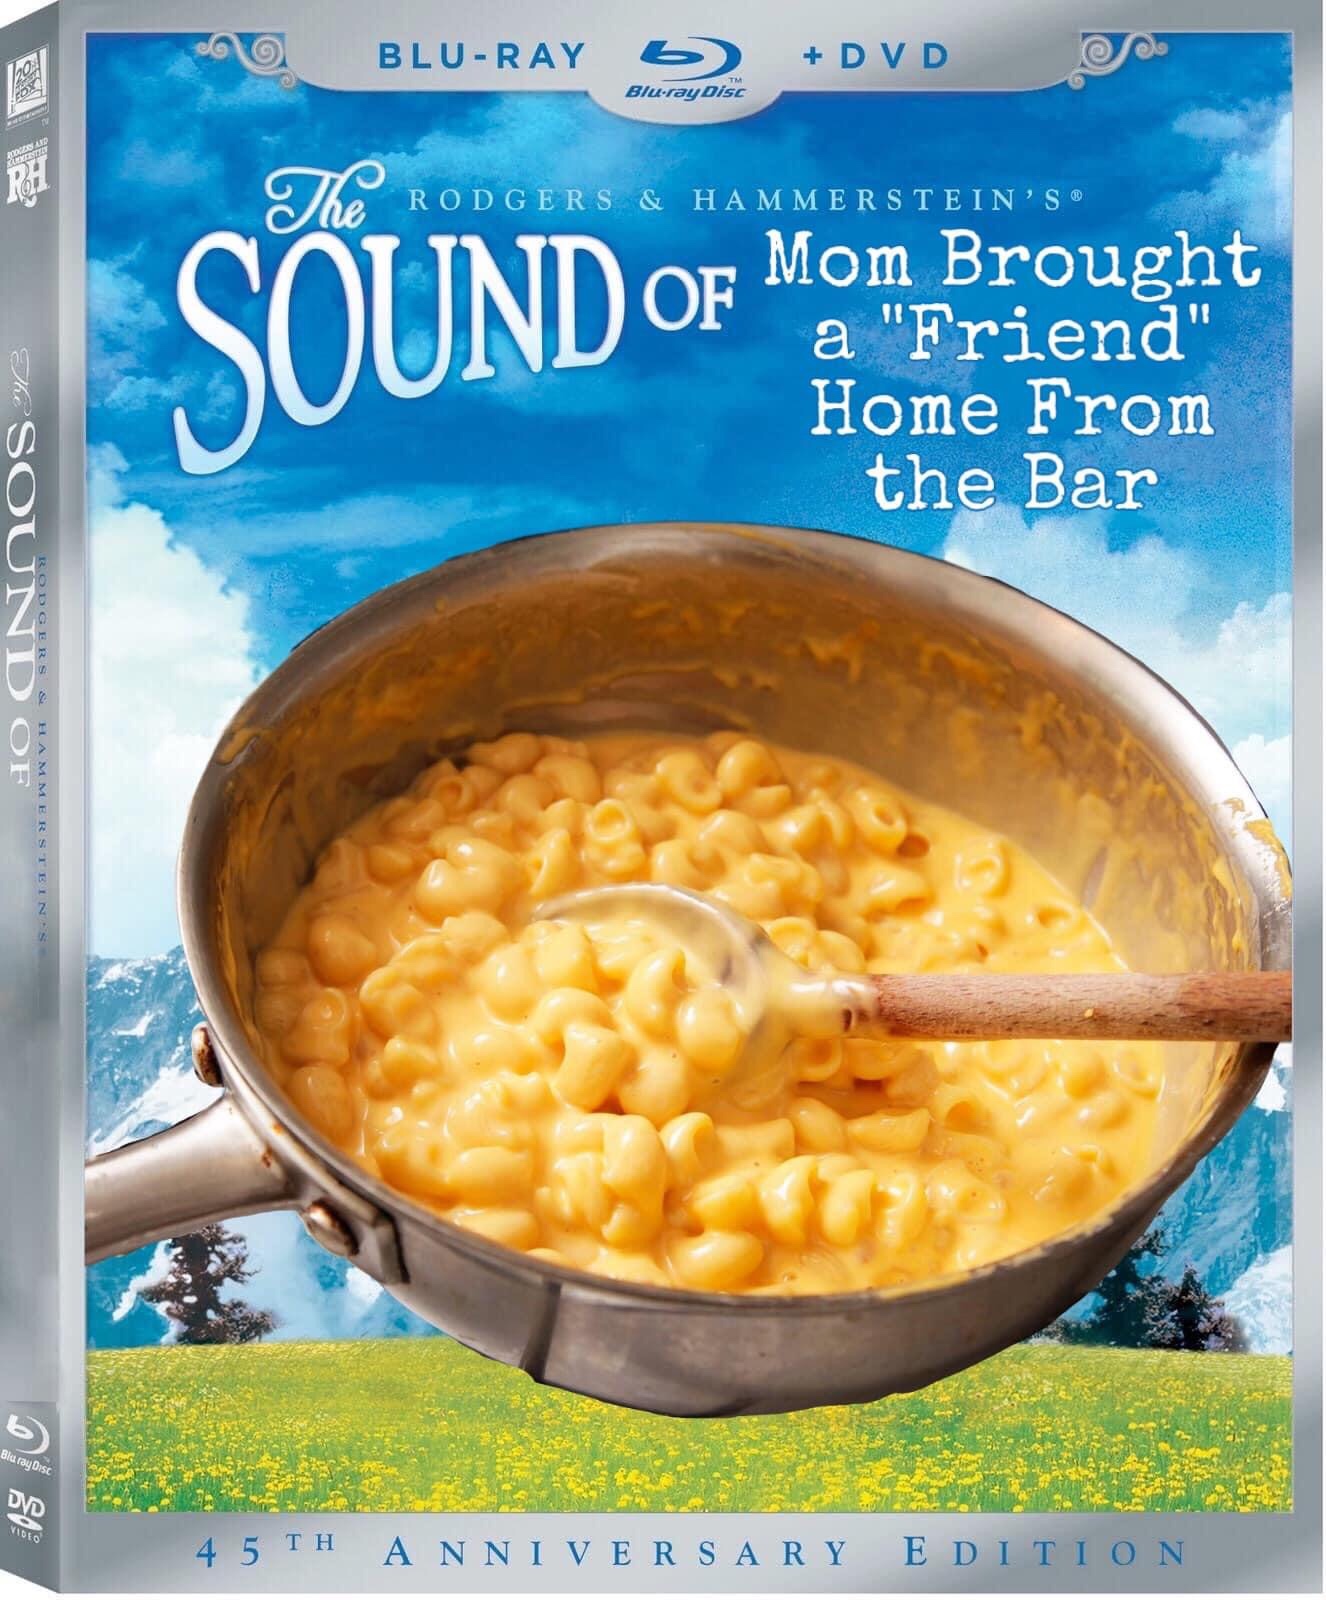 Macaroni and cheese - Mod BluRay Dvd 1201 Fox Bluray Disc Ph The Rodgers & Hammerstein'S Sund Mom Brought a "Friend" Home From the Bar The Sound Of Odgers & Hammersteines Blu ray Disc Dvd Video 4 5 Ti Anni Versary Edition